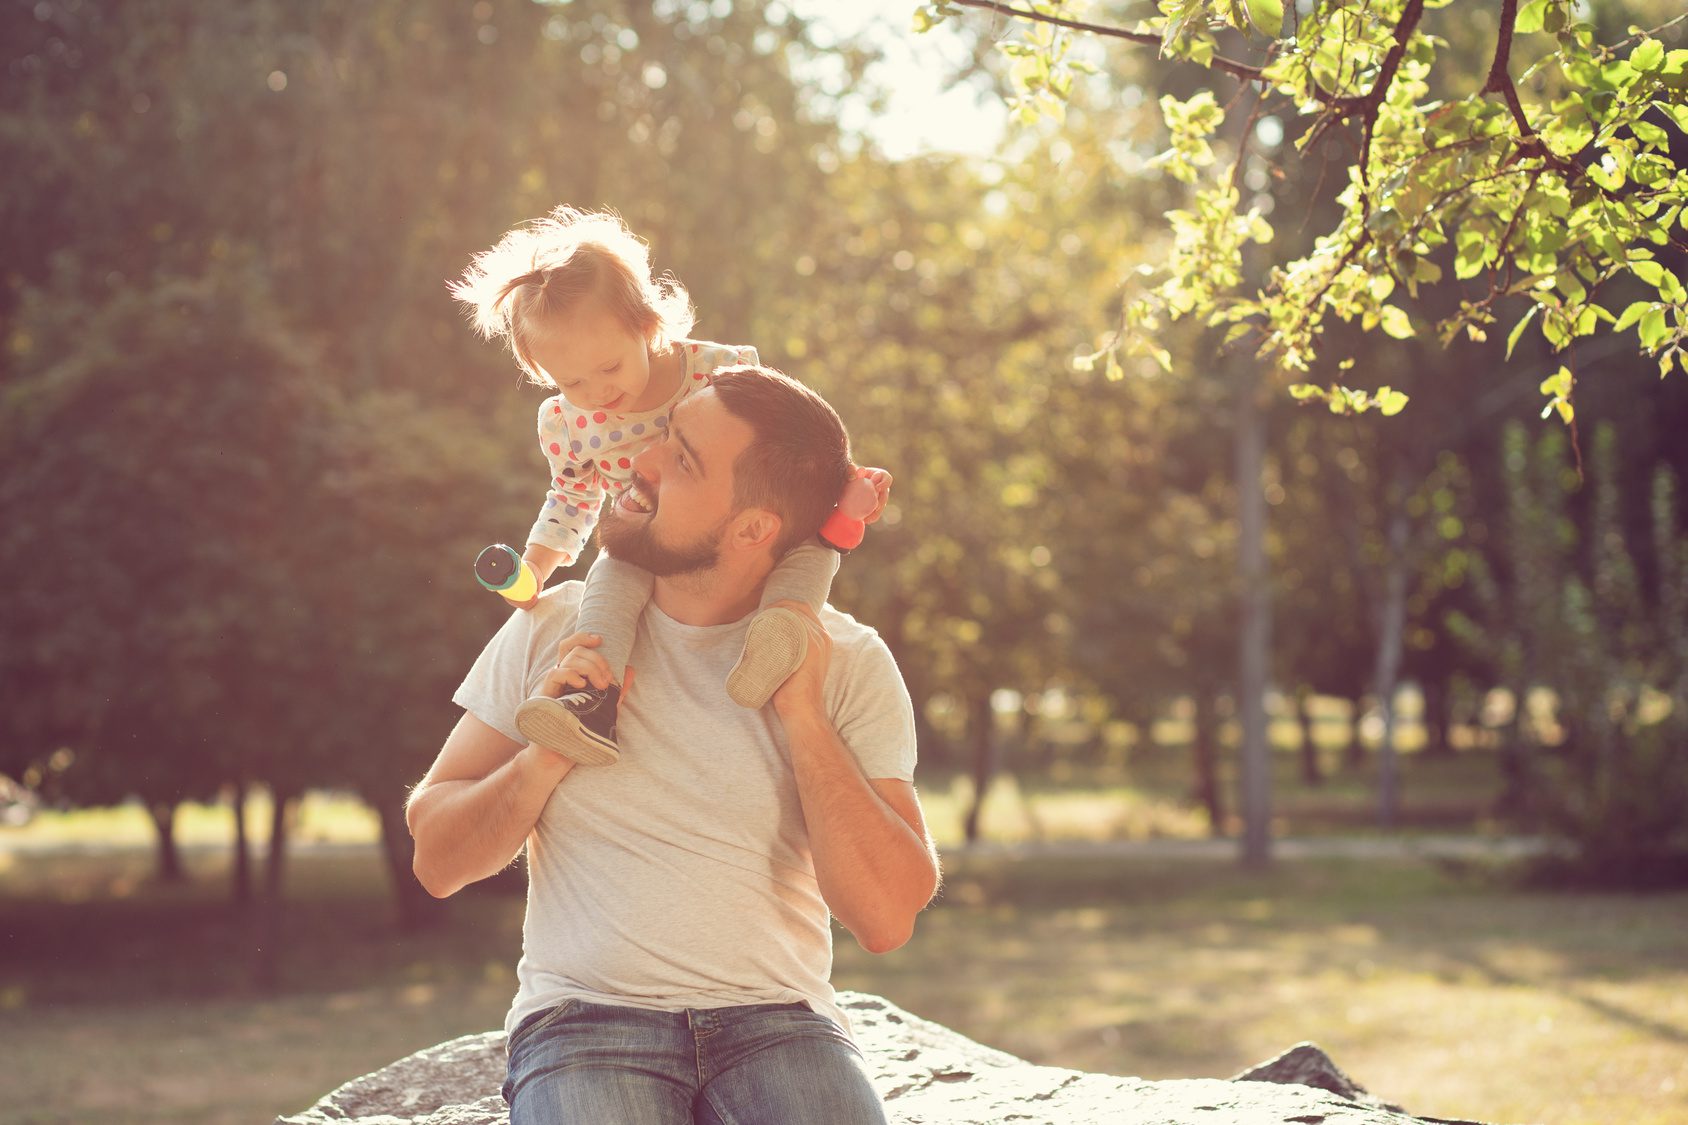 New Study Suggests Divorced Fathers in Illinois are Not Spending as Much Time With Their Kids